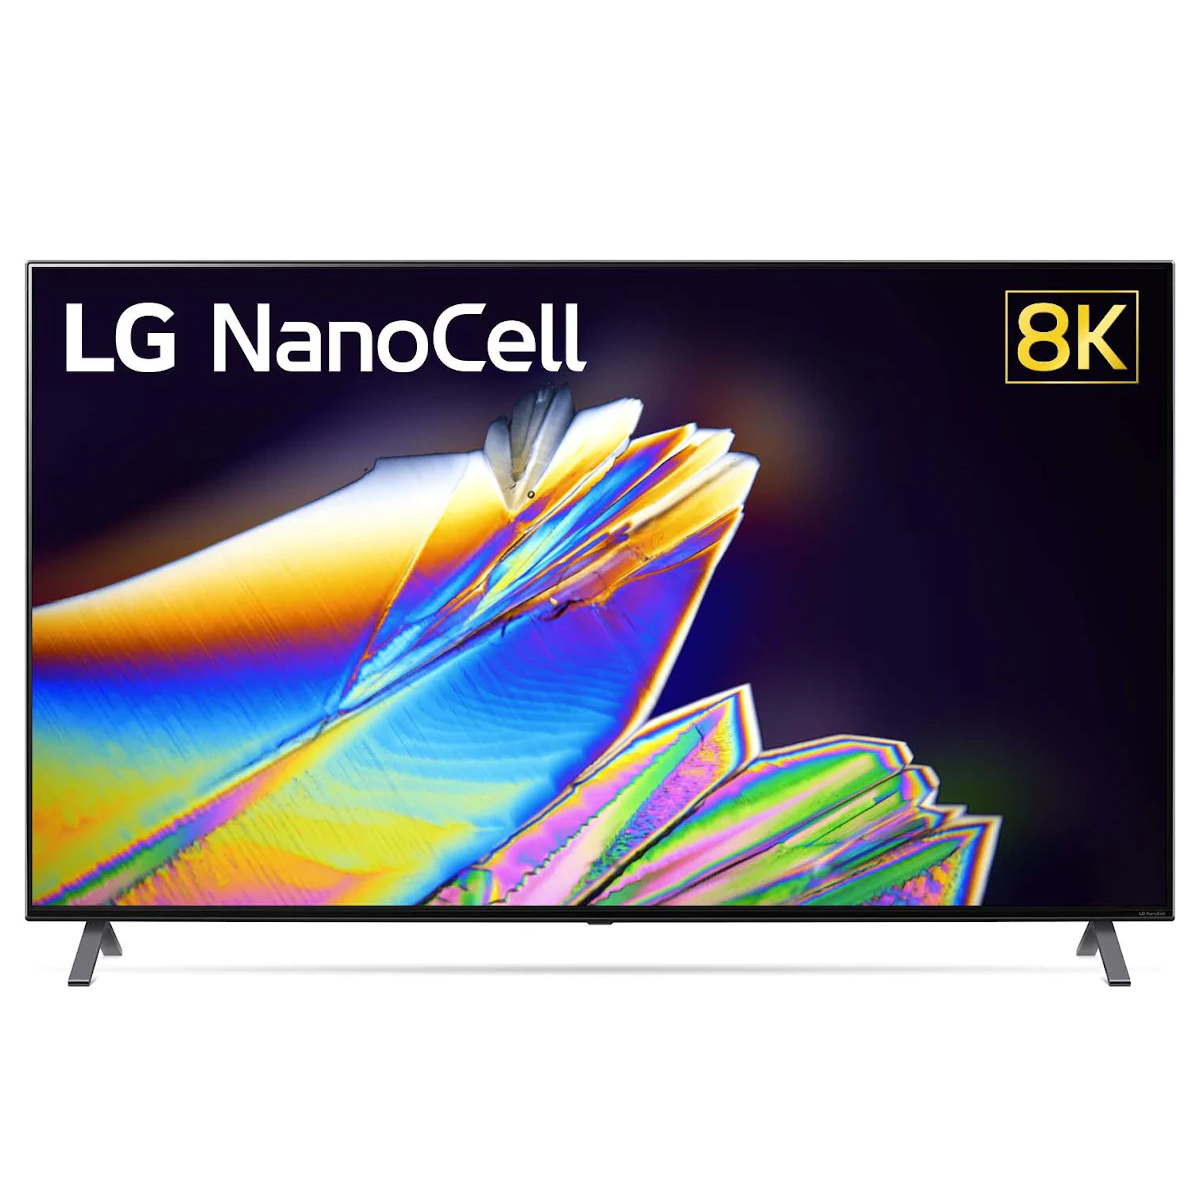 LG 55inch NanoCell 8K HDR LED SMART TV WiFi Dolby Atmos